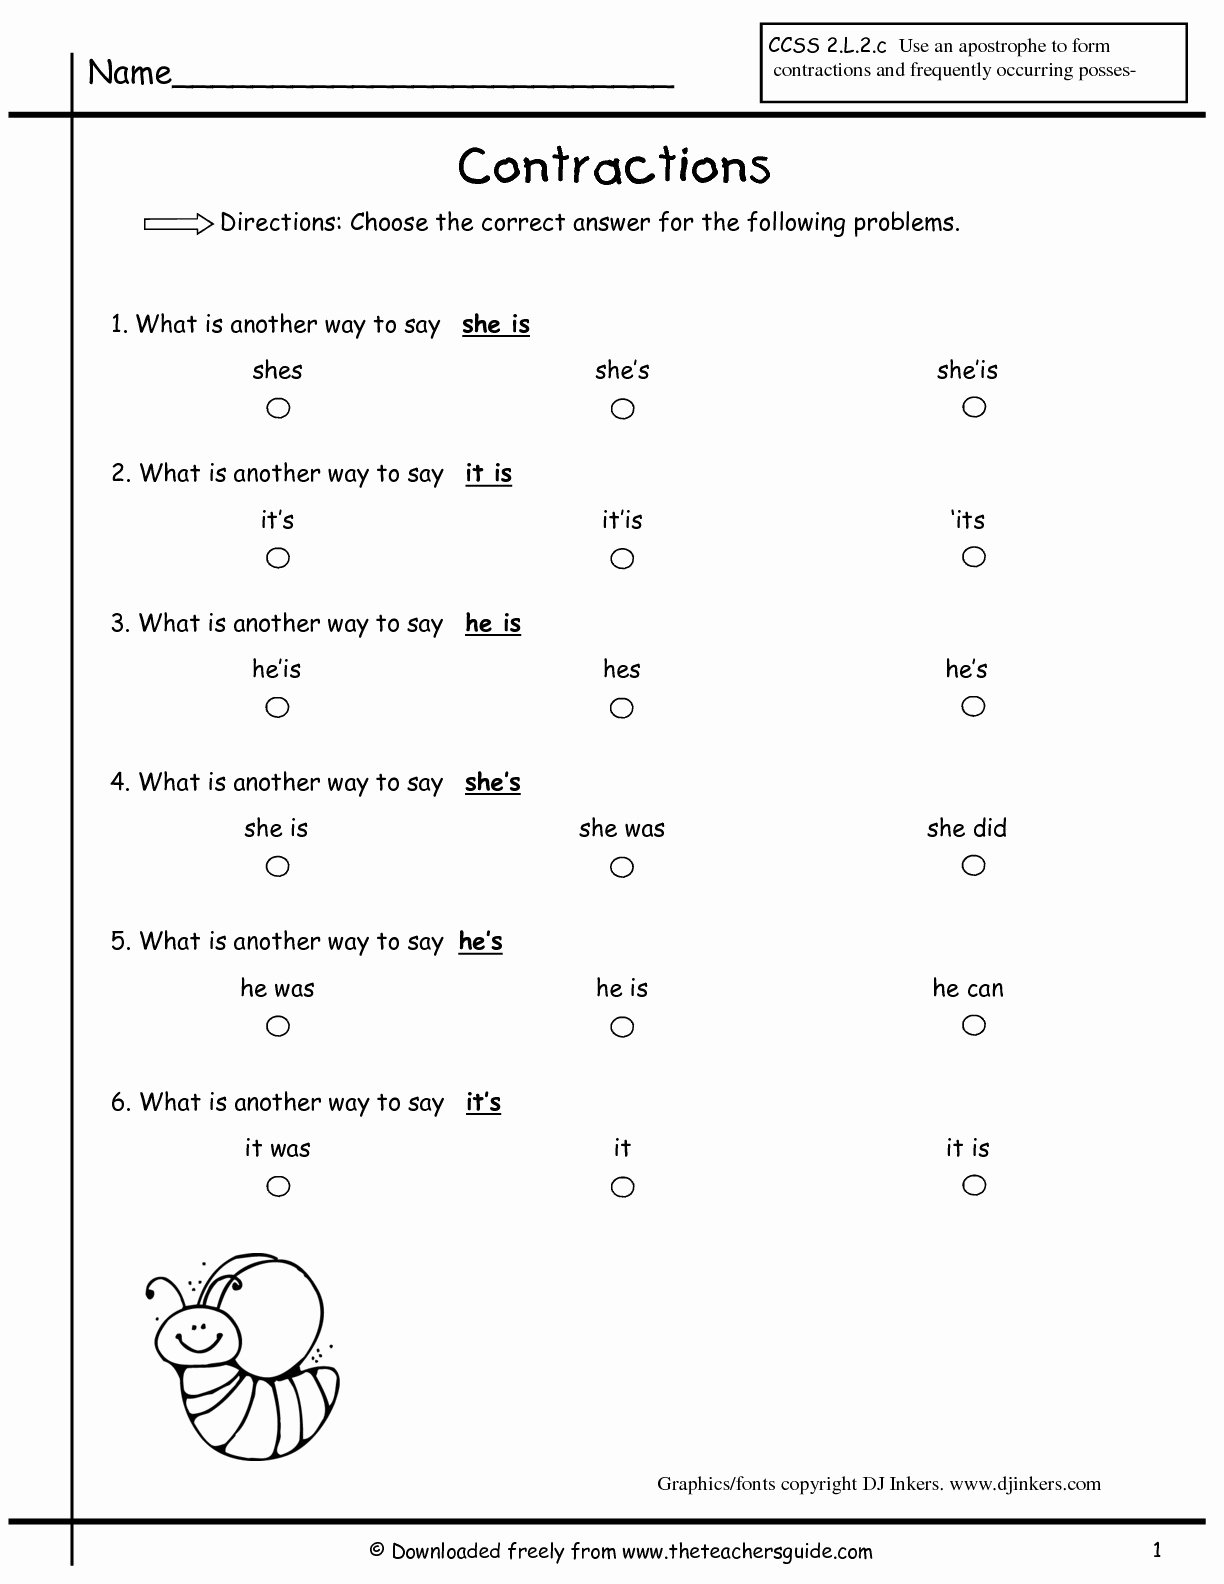 Contractions Worksheet 2nd Grade Unique Contractions Worksheets From the Teacher S Guide